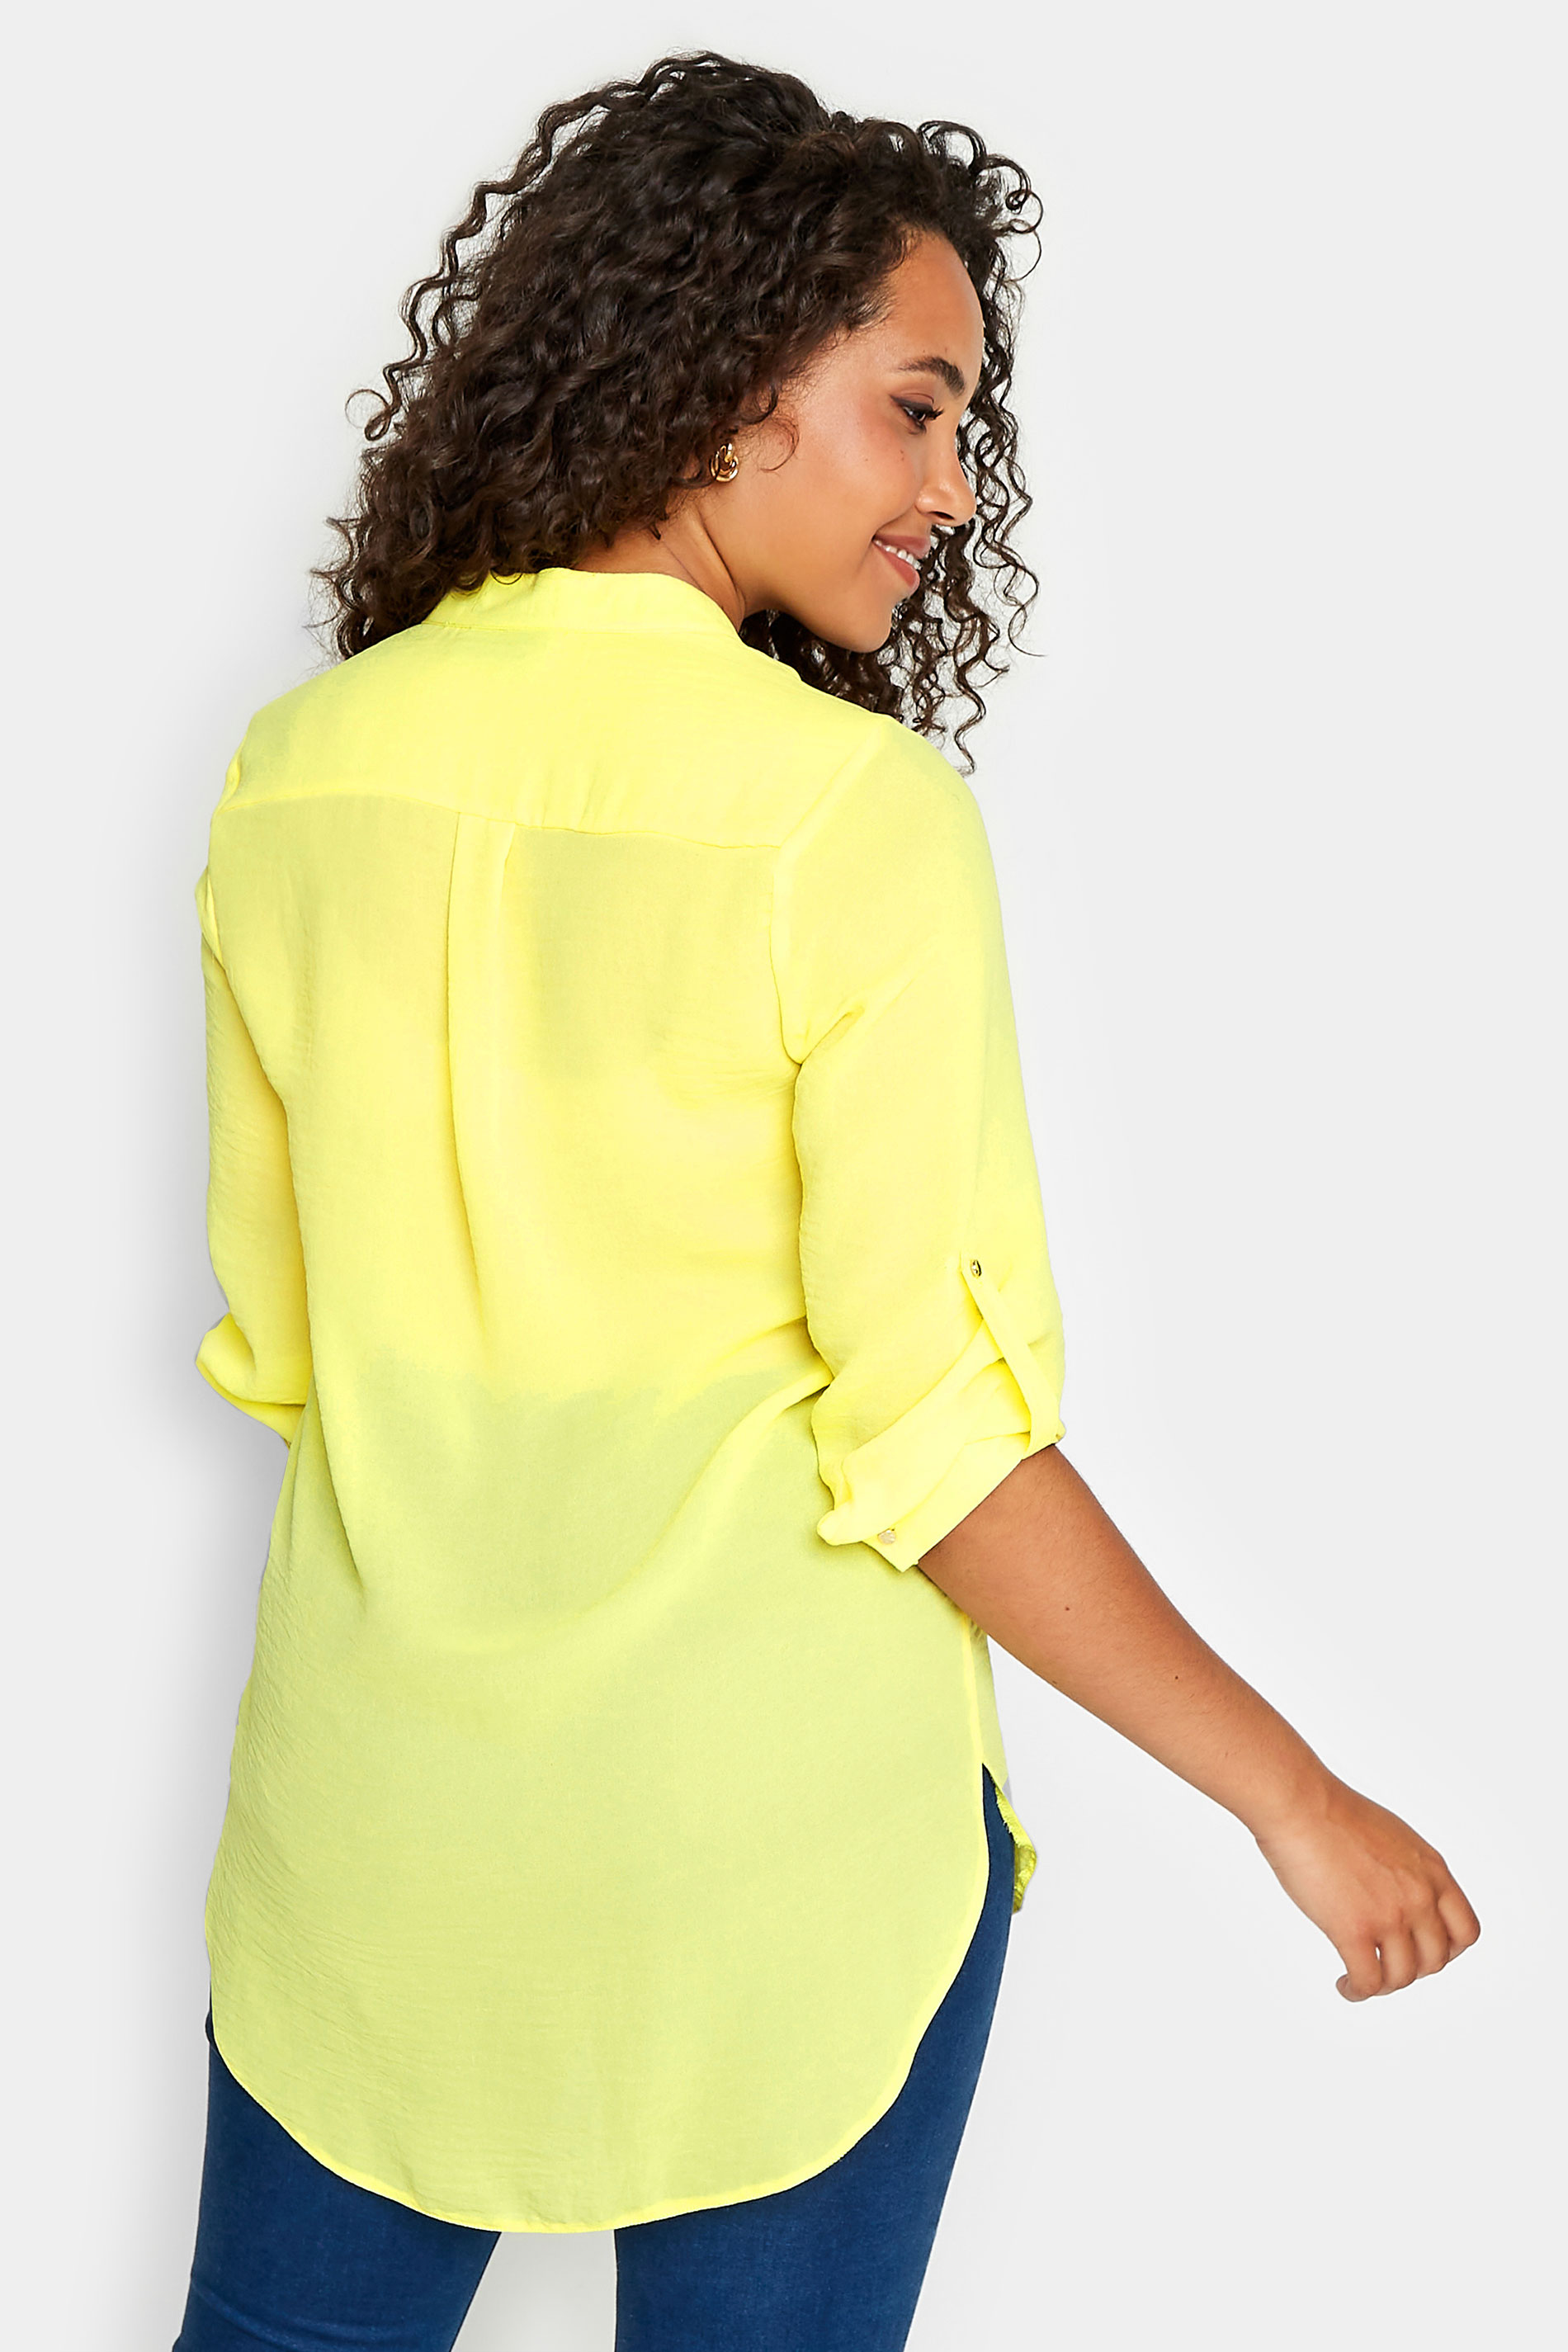 M&Co Yellow Tab Sleeve Blouse | M&Co 3